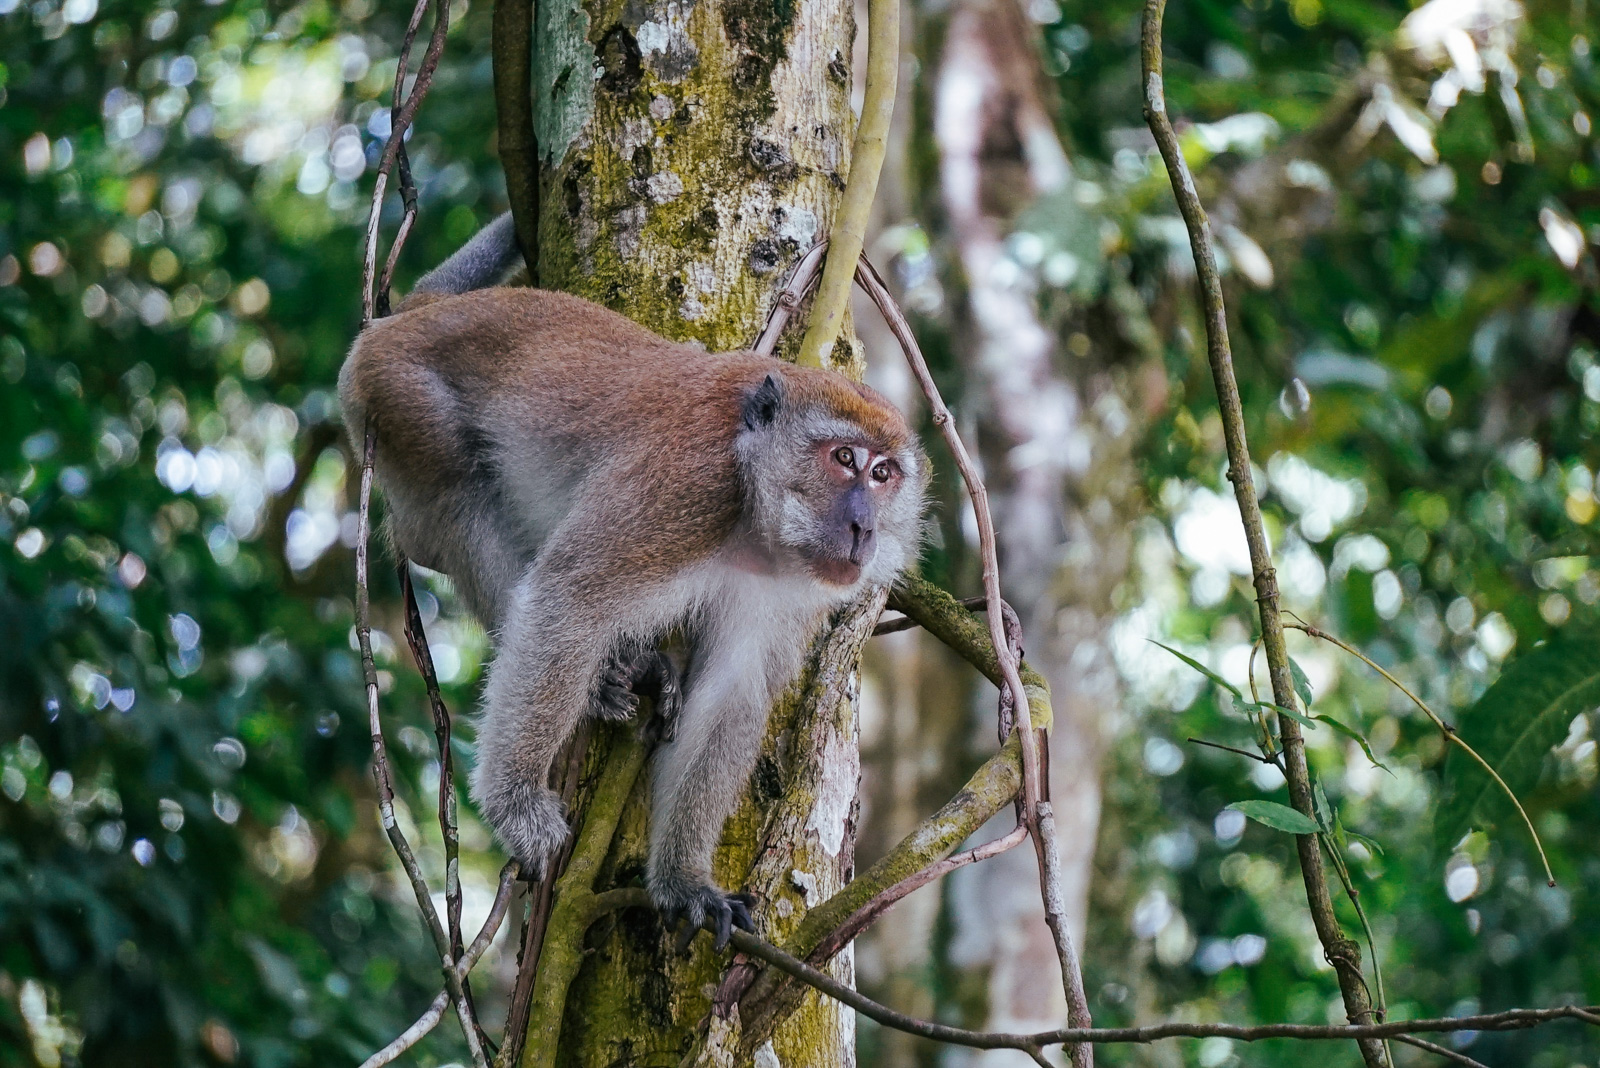 Male long-tailed macaque in a tree